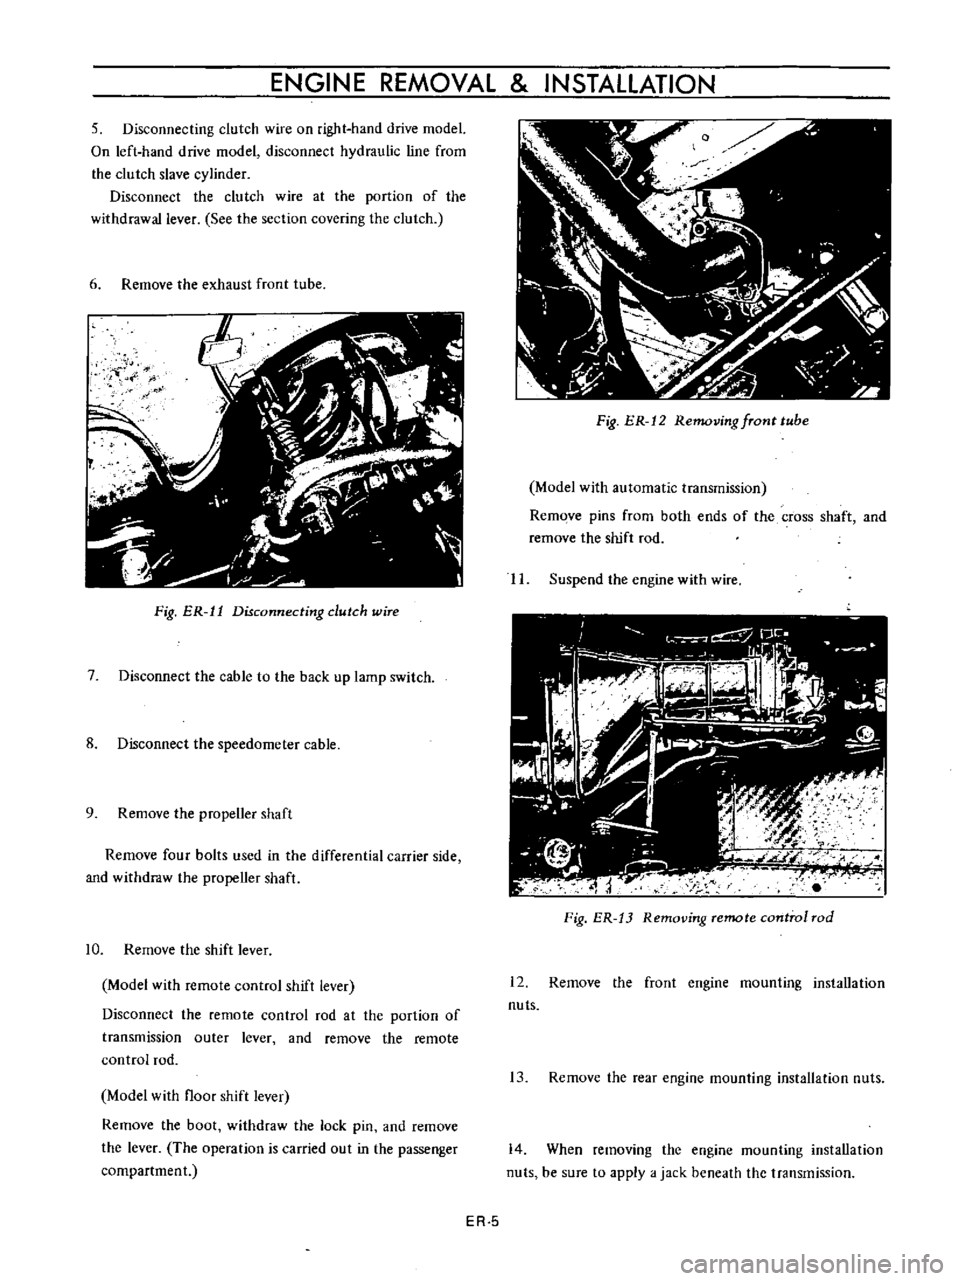 DATSUN B110 1973  Service Repair Manual 
ENGINE 
REMOVAL

INSTAllATION

5

Disconnecting 
clutch

wire 
on

right 
hand 
drive

model

On

left 
hand 
drive

model 
disconnect

hydraulic 
line 
from

the

clutch 
slave

cylinder

Disconnect